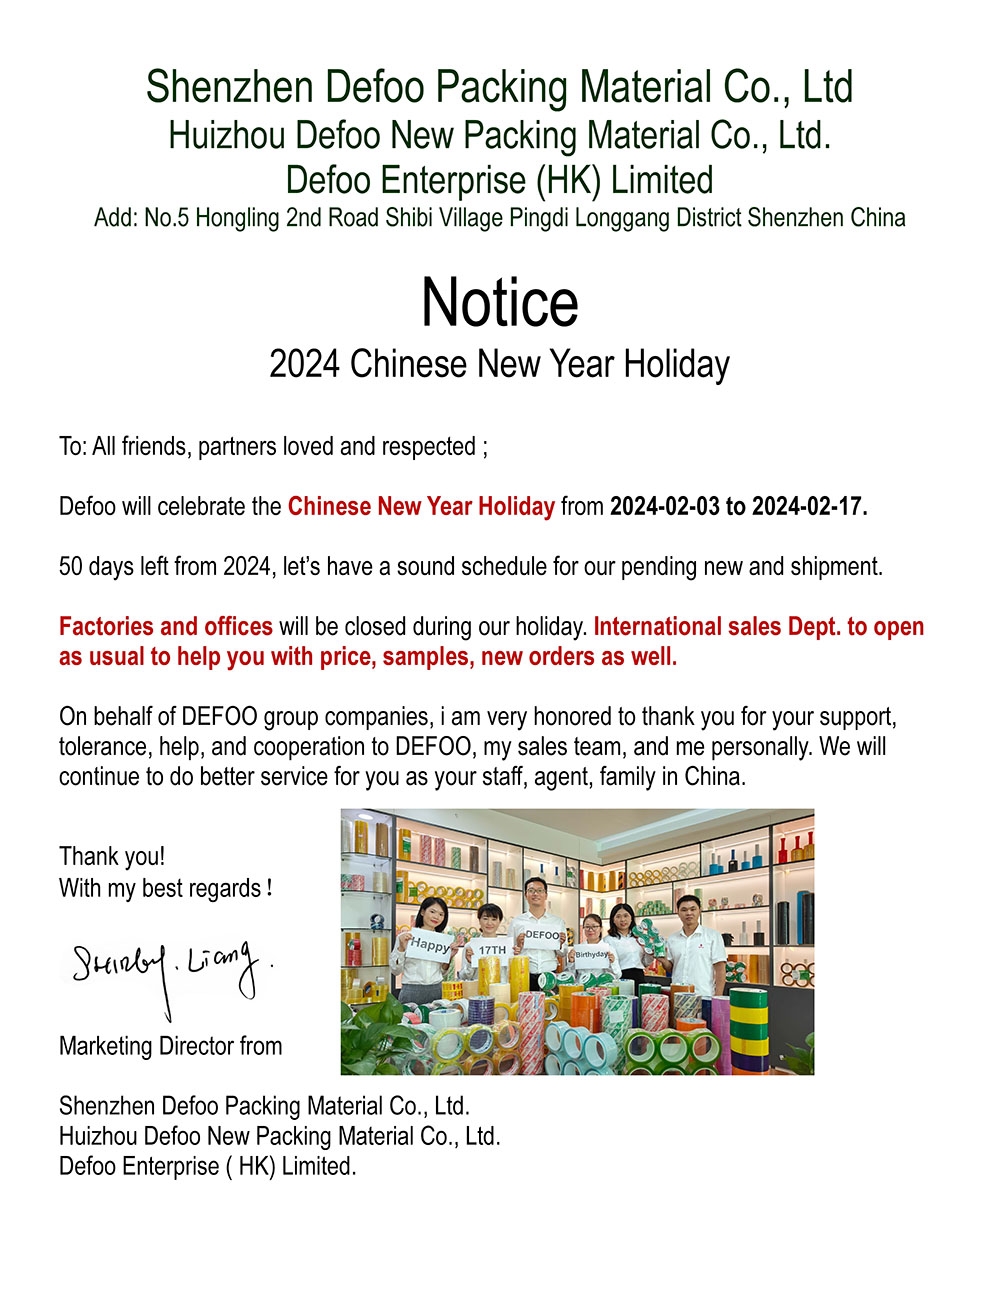 2024 Defoo Chinese New Year Holiday